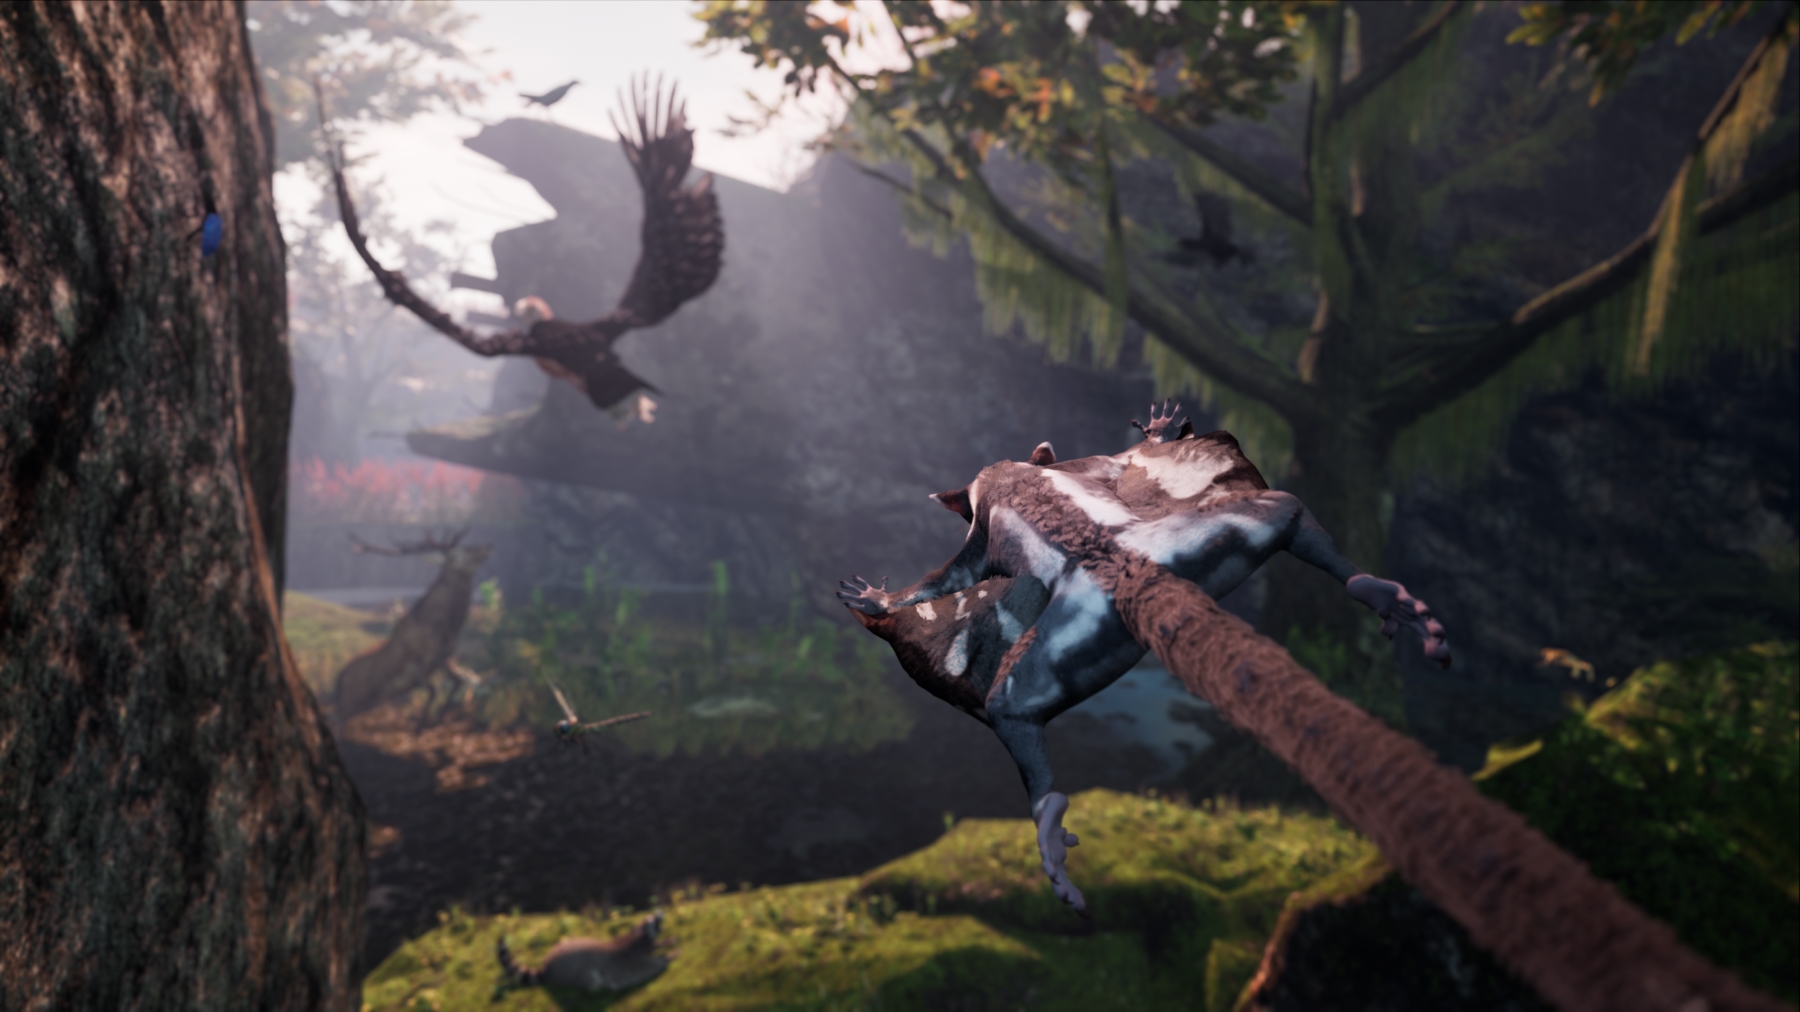 Sugar Glider Adventure Game “Away: The Survival Series” Announced for PC, PS4